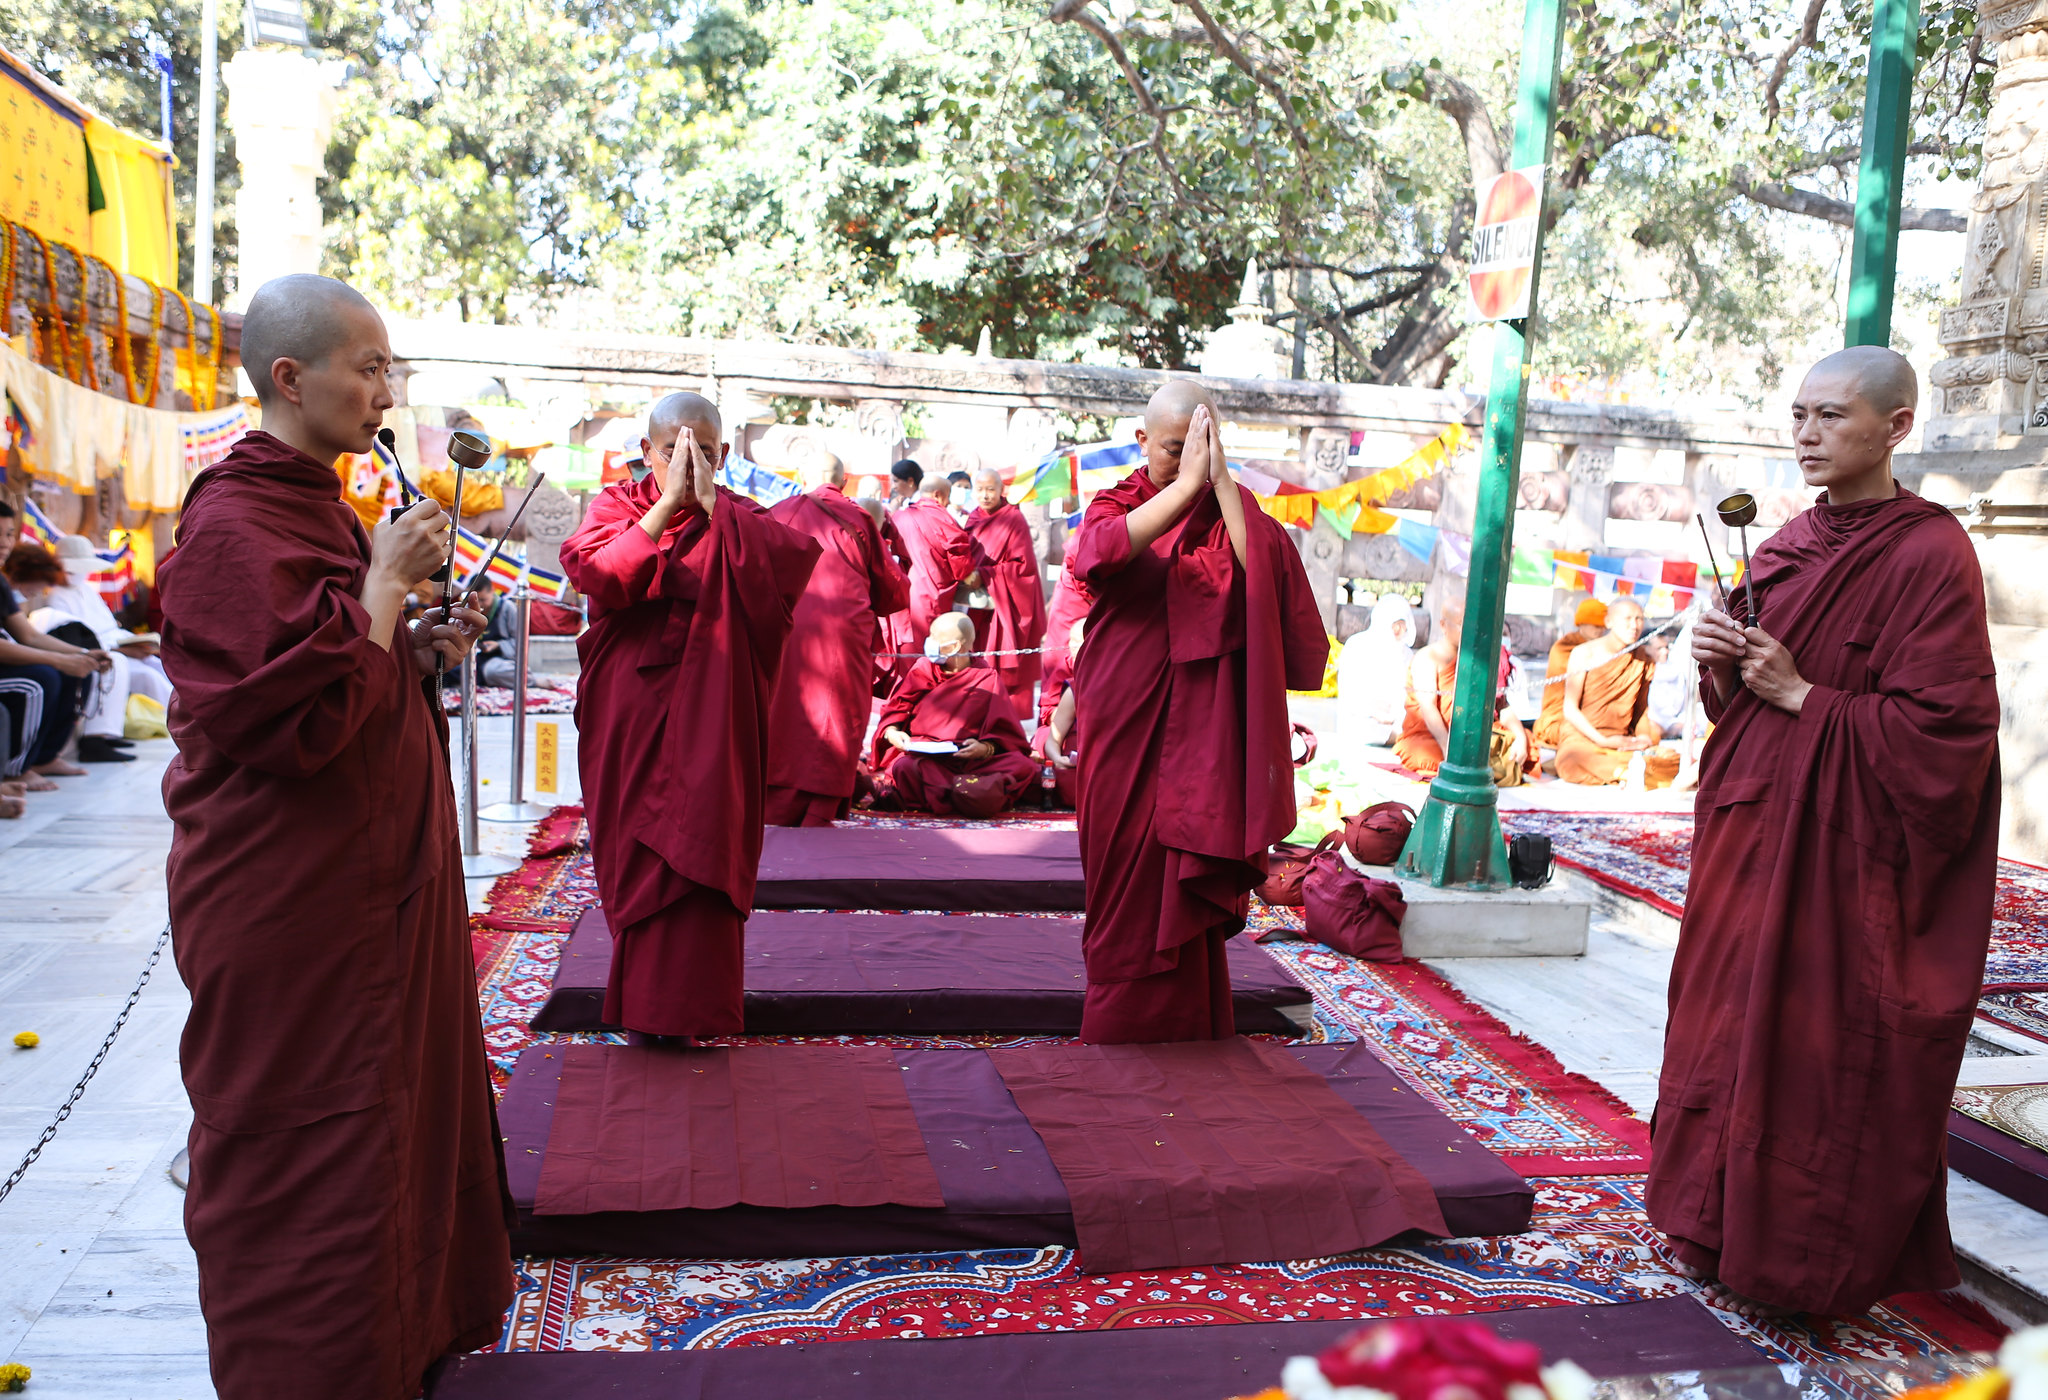 History in the Making: The First Step Toward Full Ordination for Tibetan Buddhist Nuns